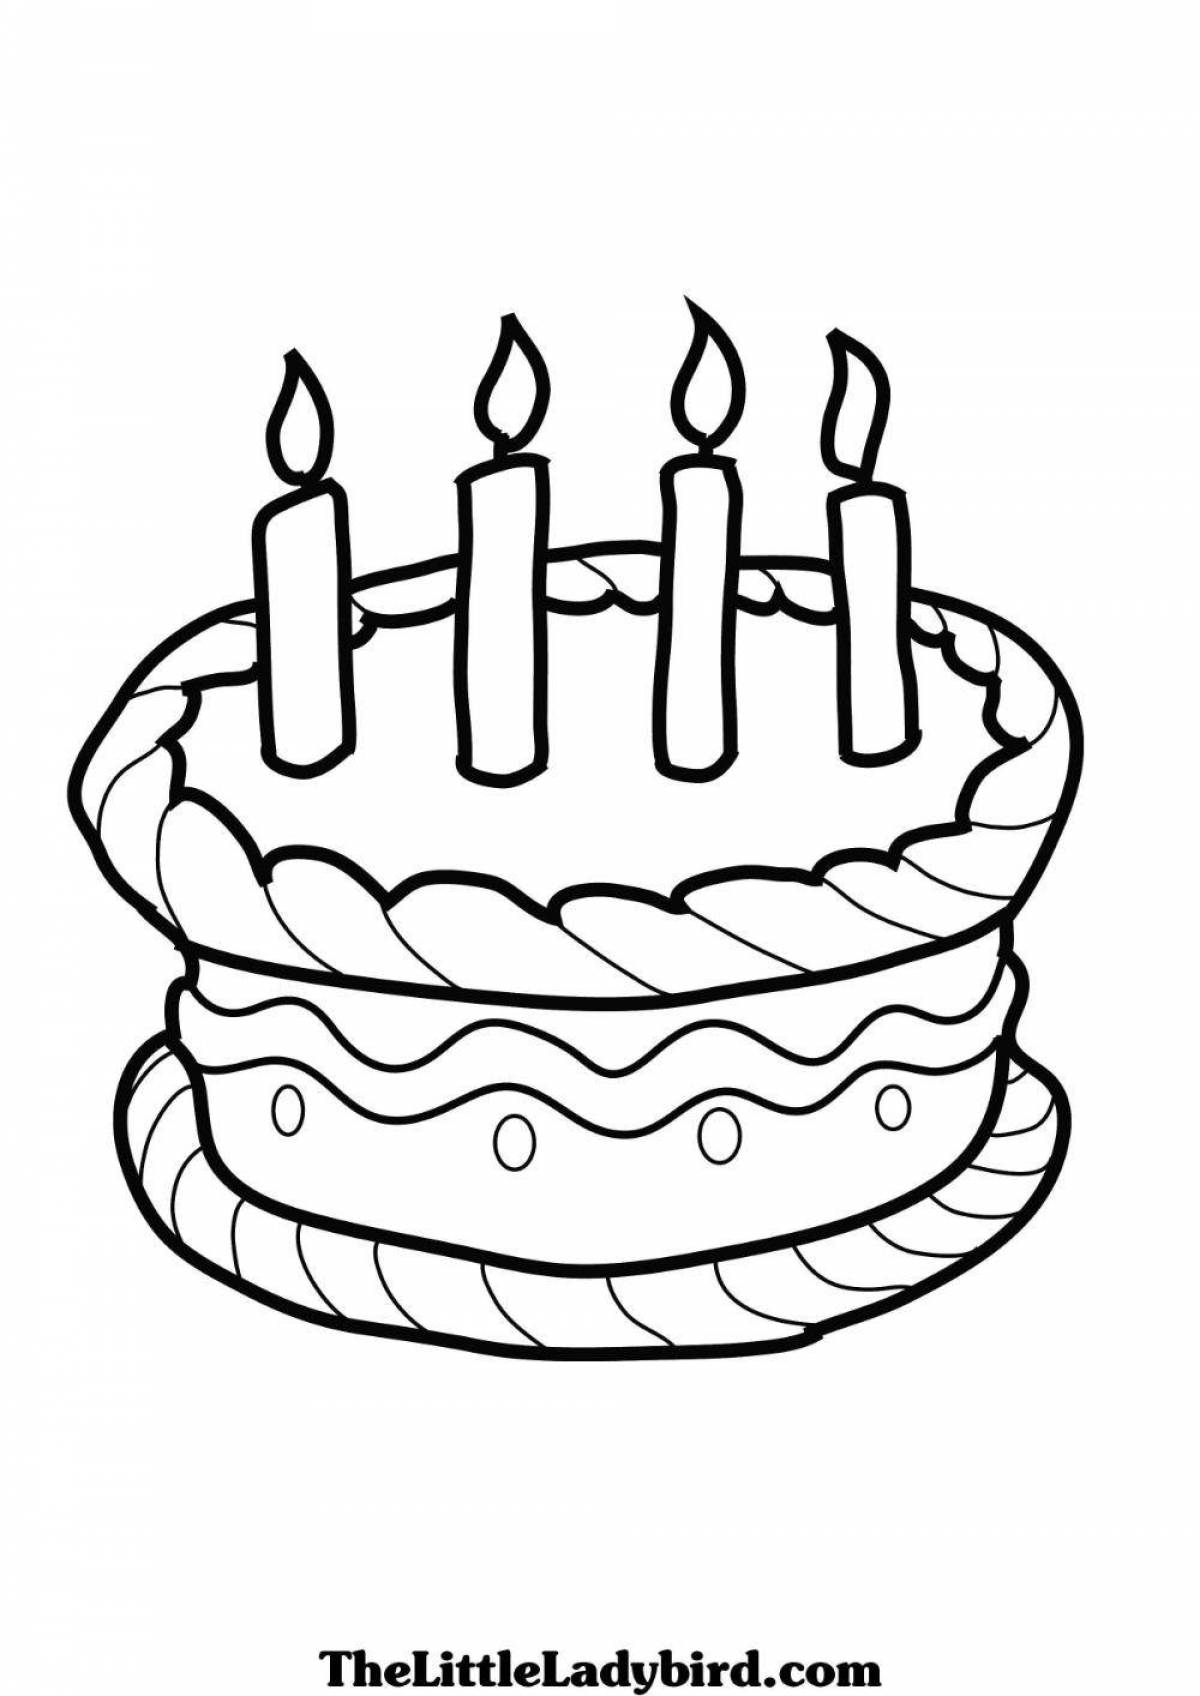 Coloring page dazzling cake for kids